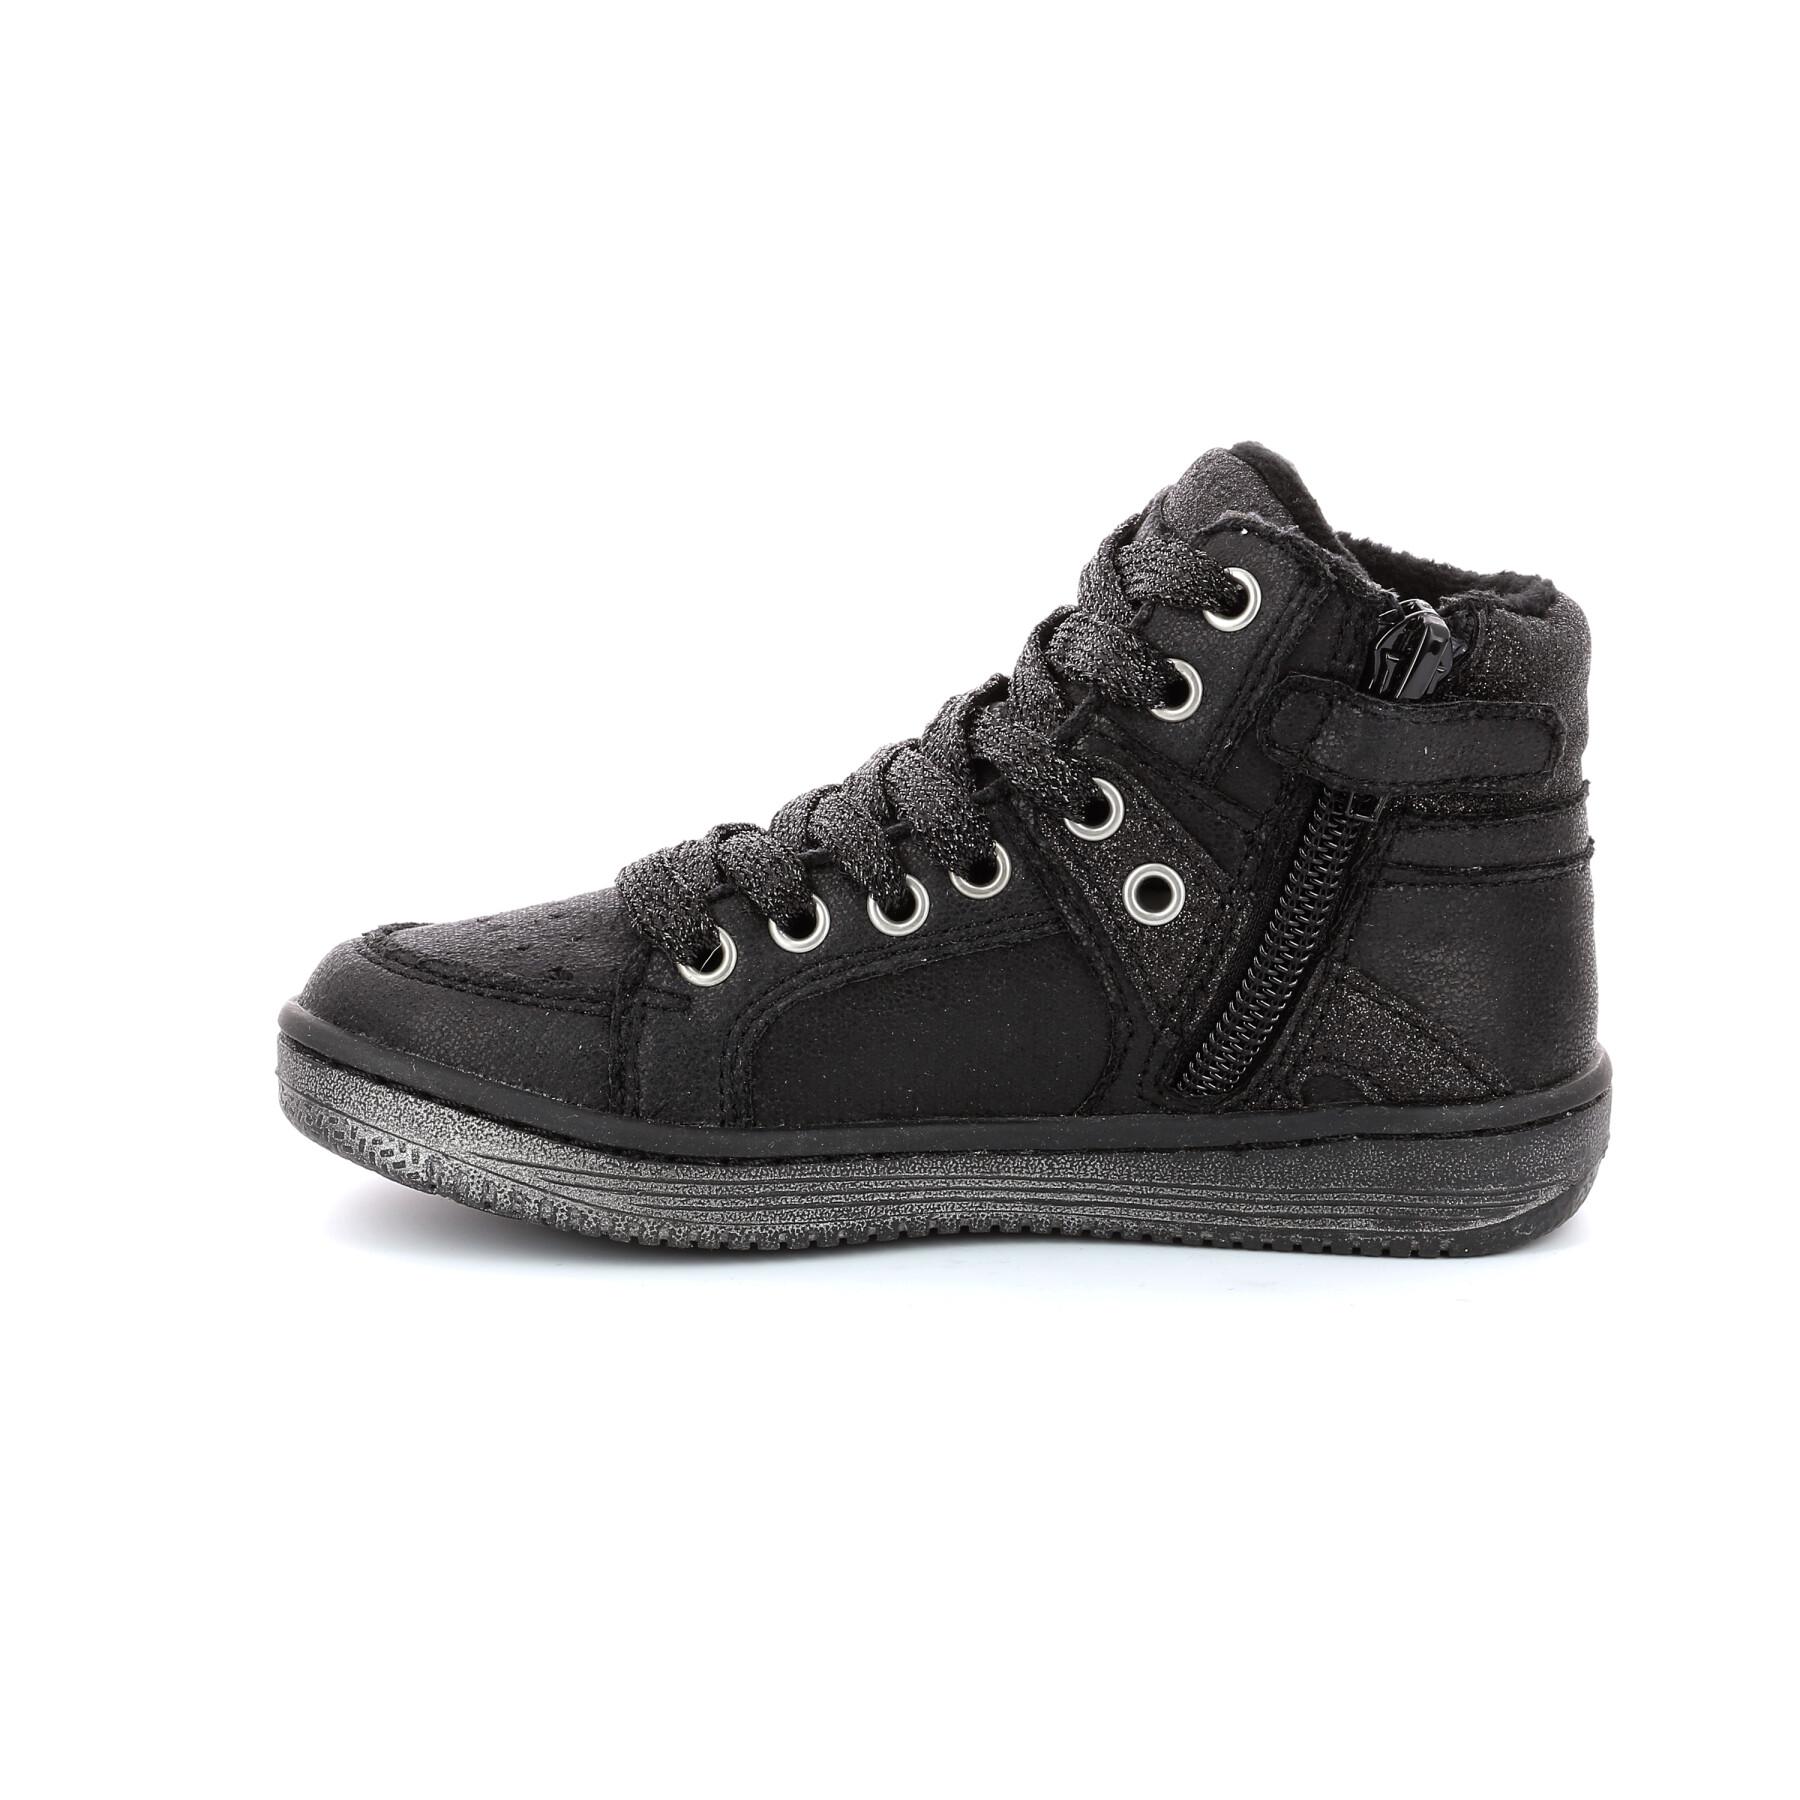 Chaussures enfant Kickers Lowell